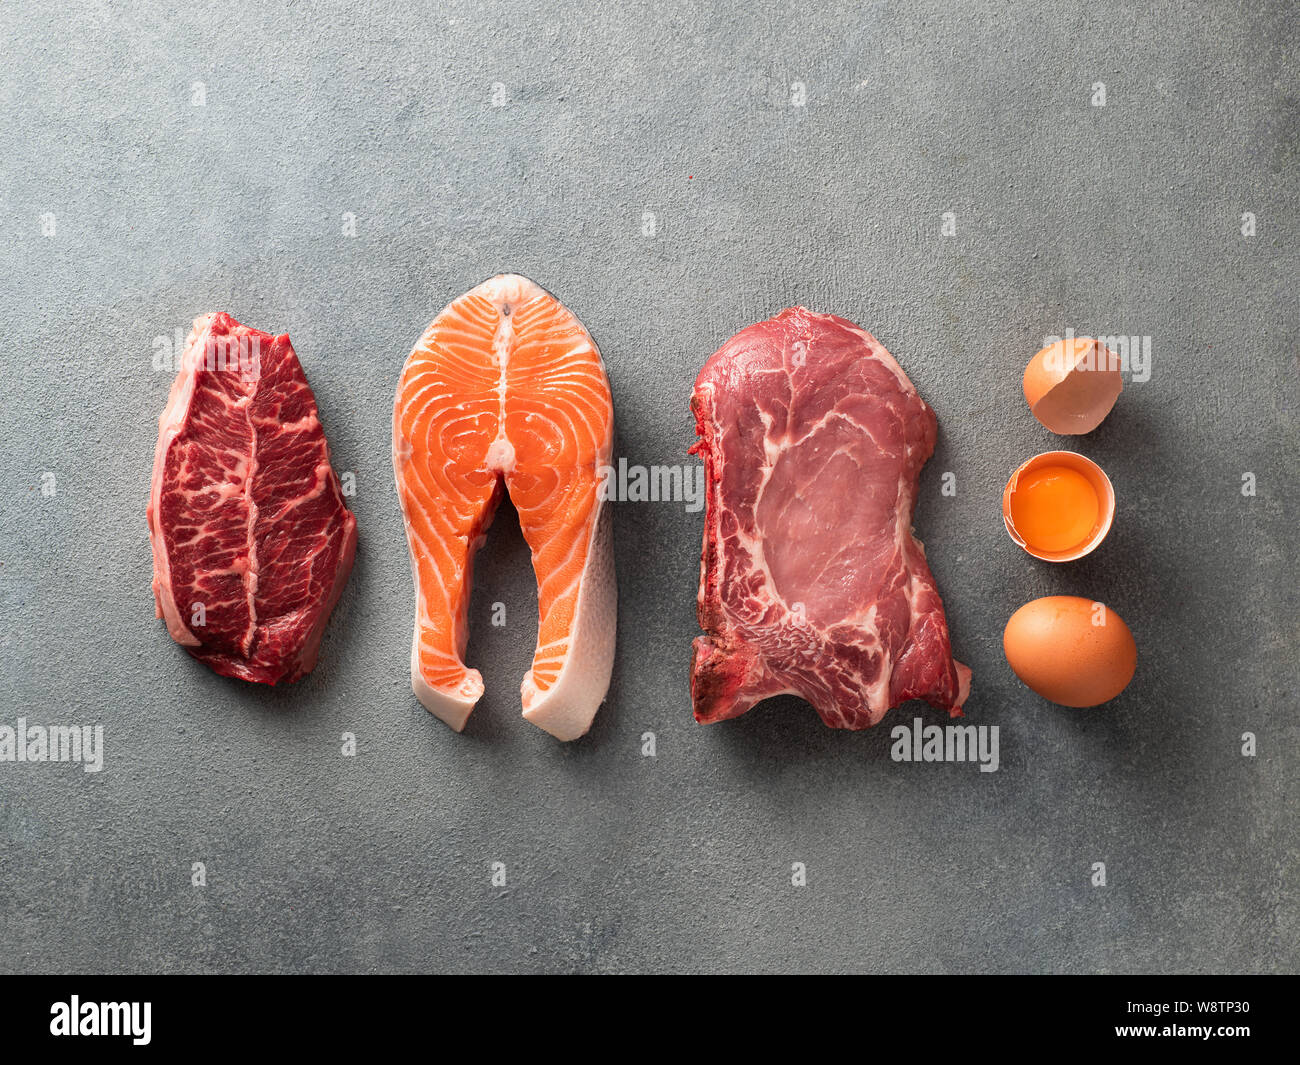 Carnivore or keto diet concept. Raw ingredients for zero carb or low carb diet - rib eye, salmon steak, pork, egg on gray stone background. Top view or flat lay. Stock Photo